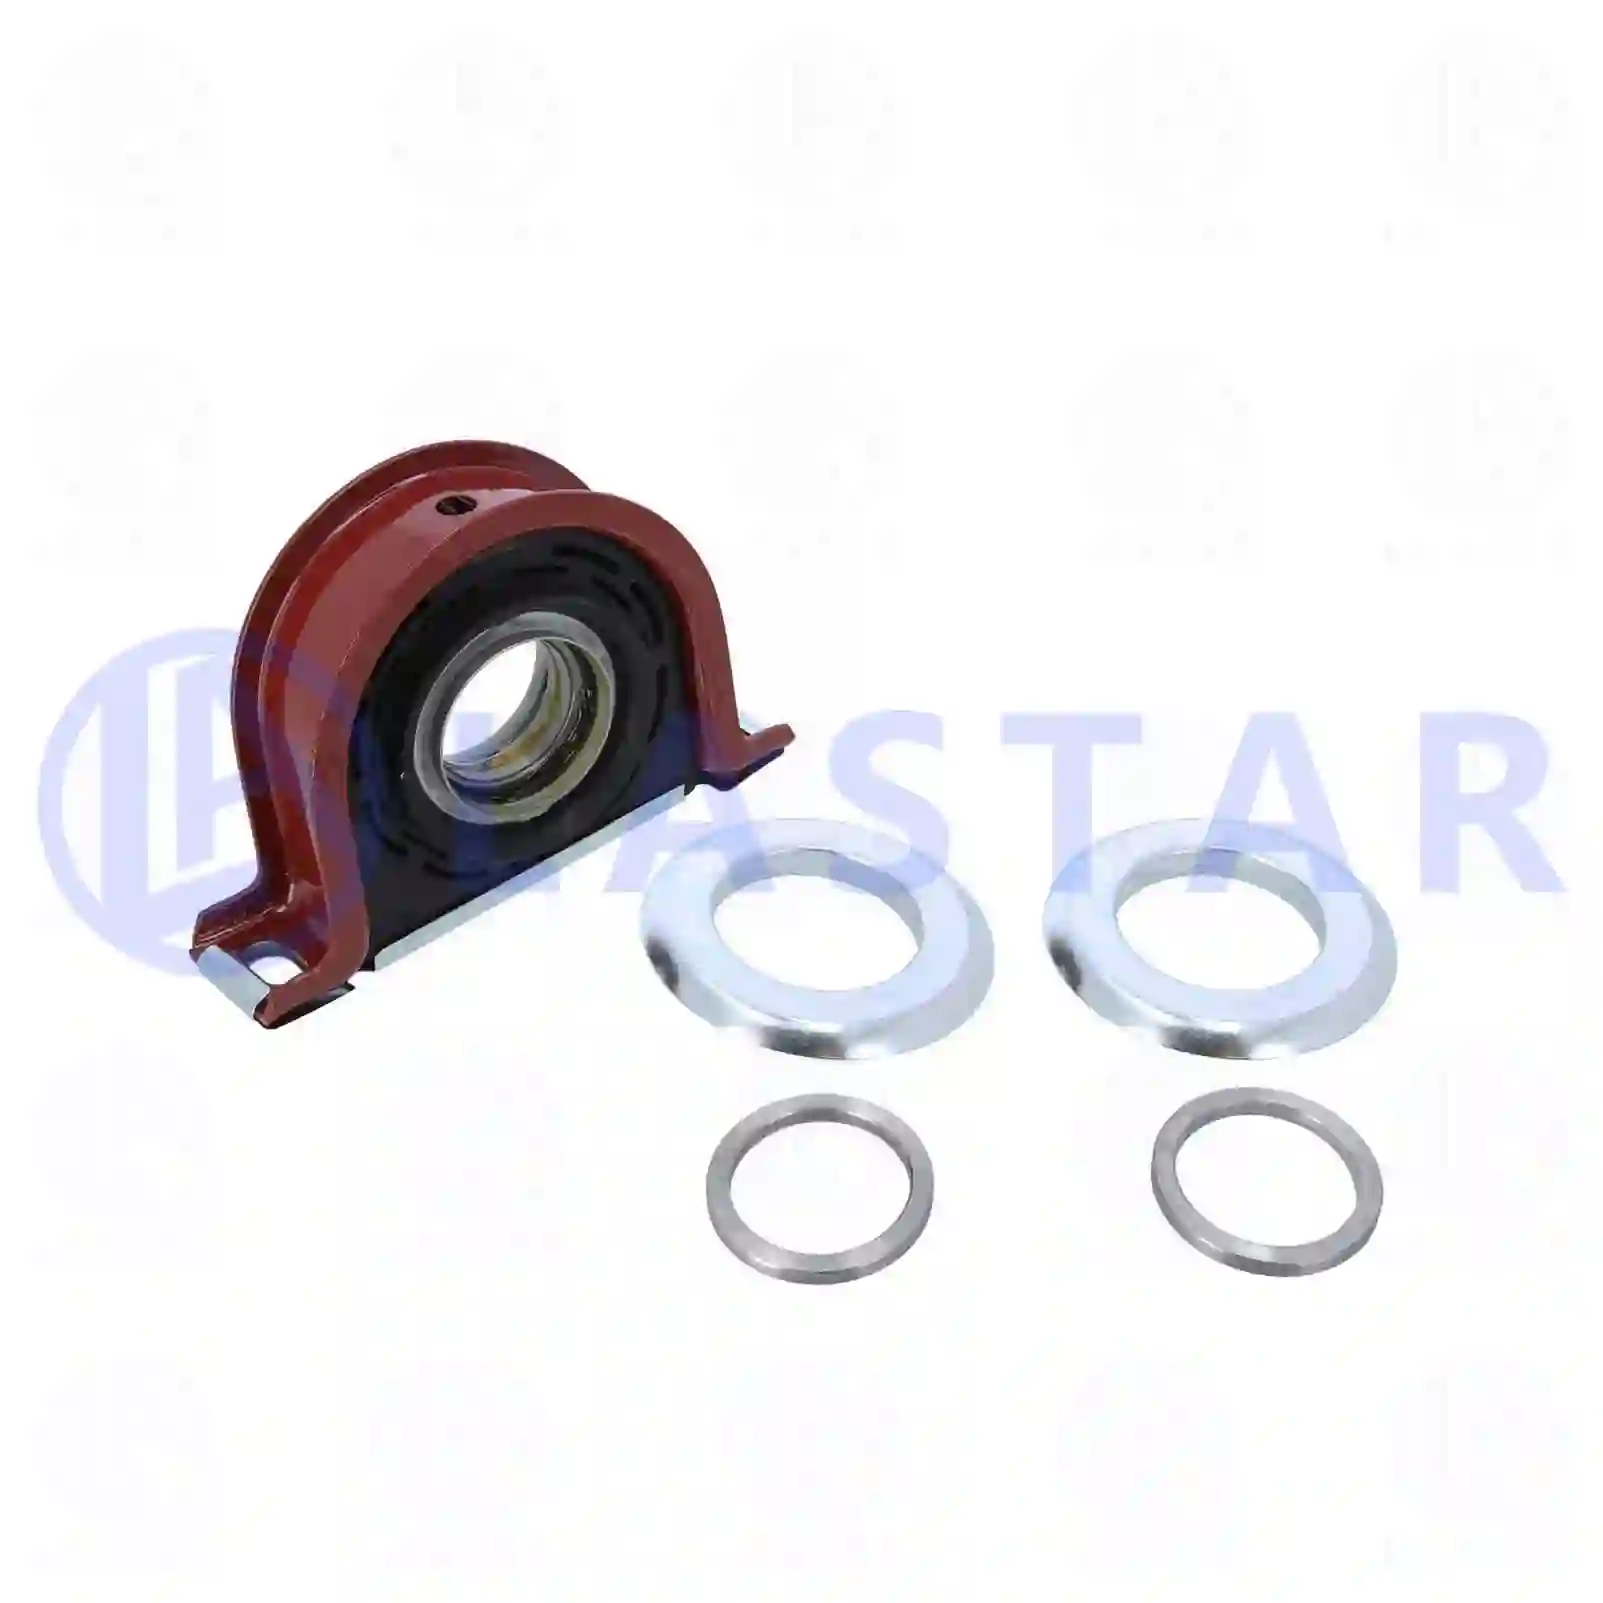 Support Bearing Center bearing, la no: 77734281 ,  oem no:0102203, 102203, ZG02490-0008 Lastar Spare Part | Truck Spare Parts, Auotomotive Spare Parts